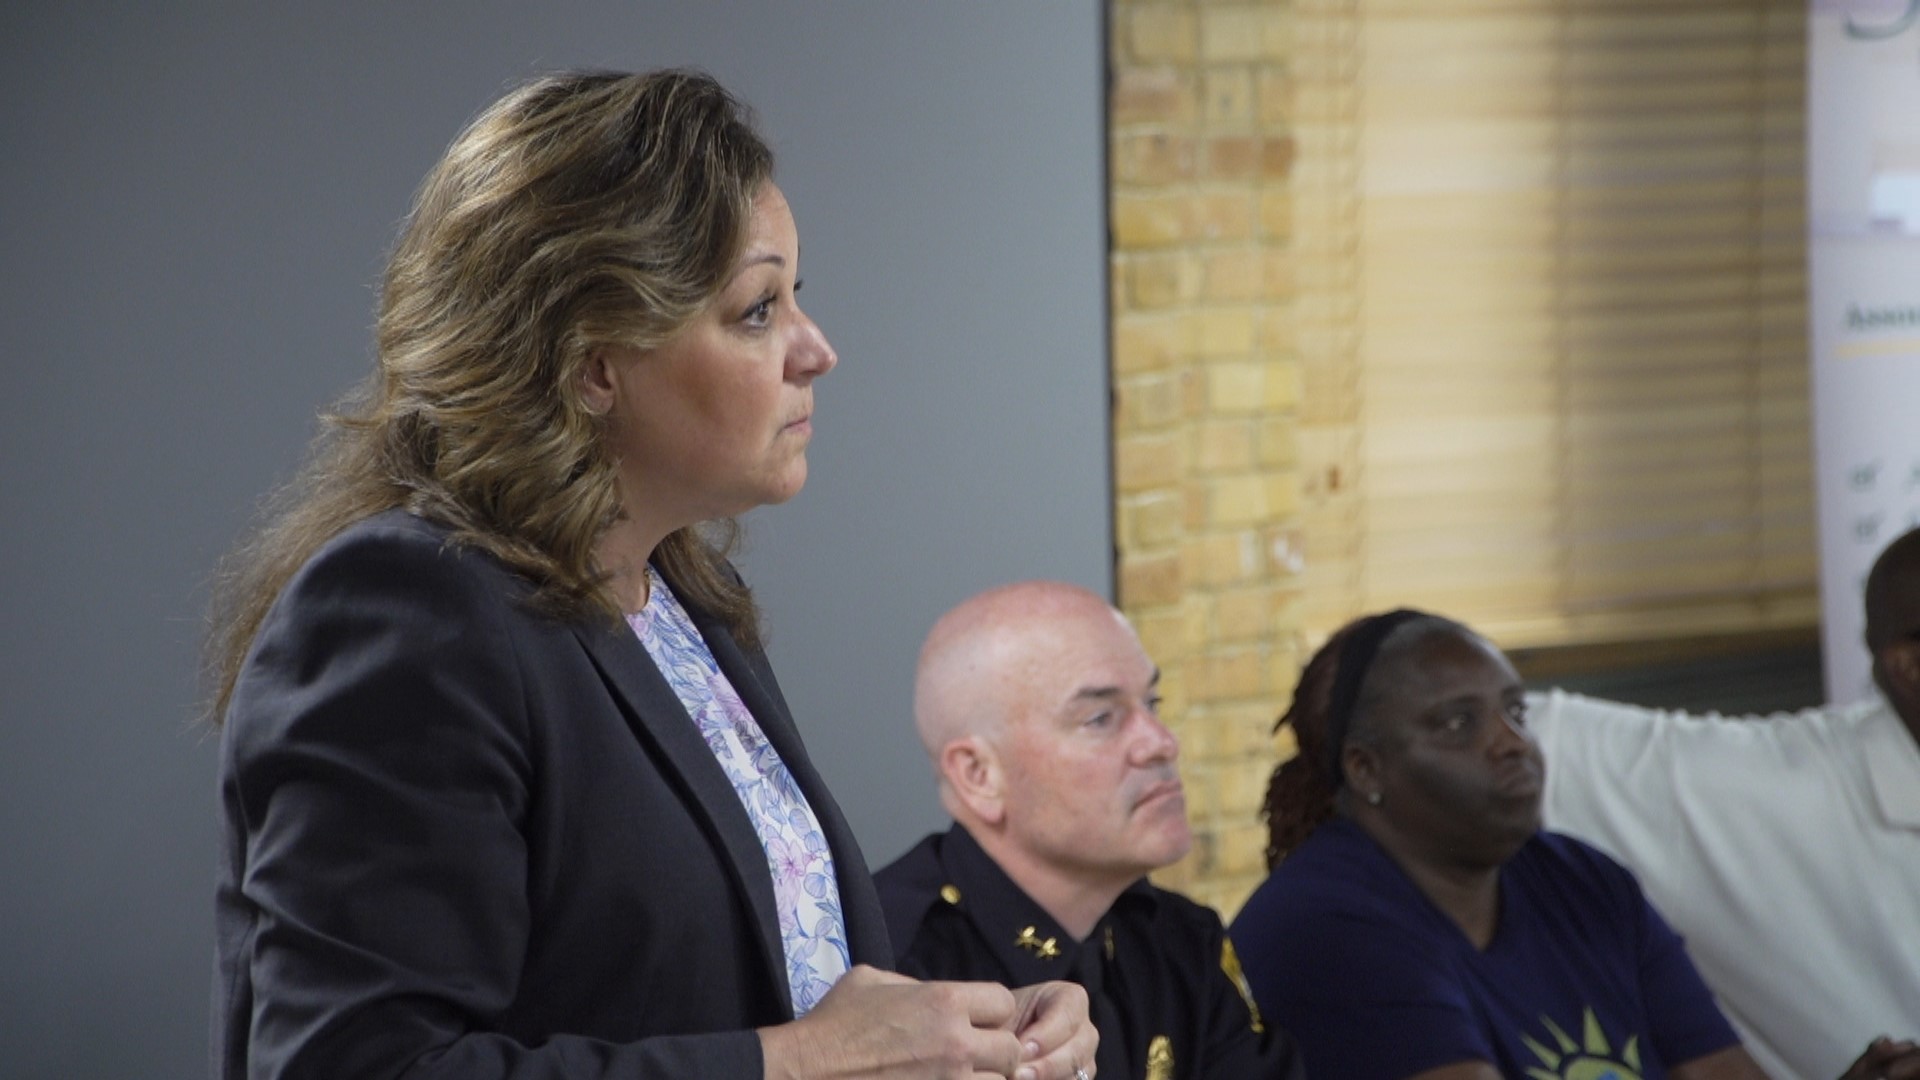 Newly appointed Tampa Police Chief Mary O'Connor held her first gun violence forum Monday night.